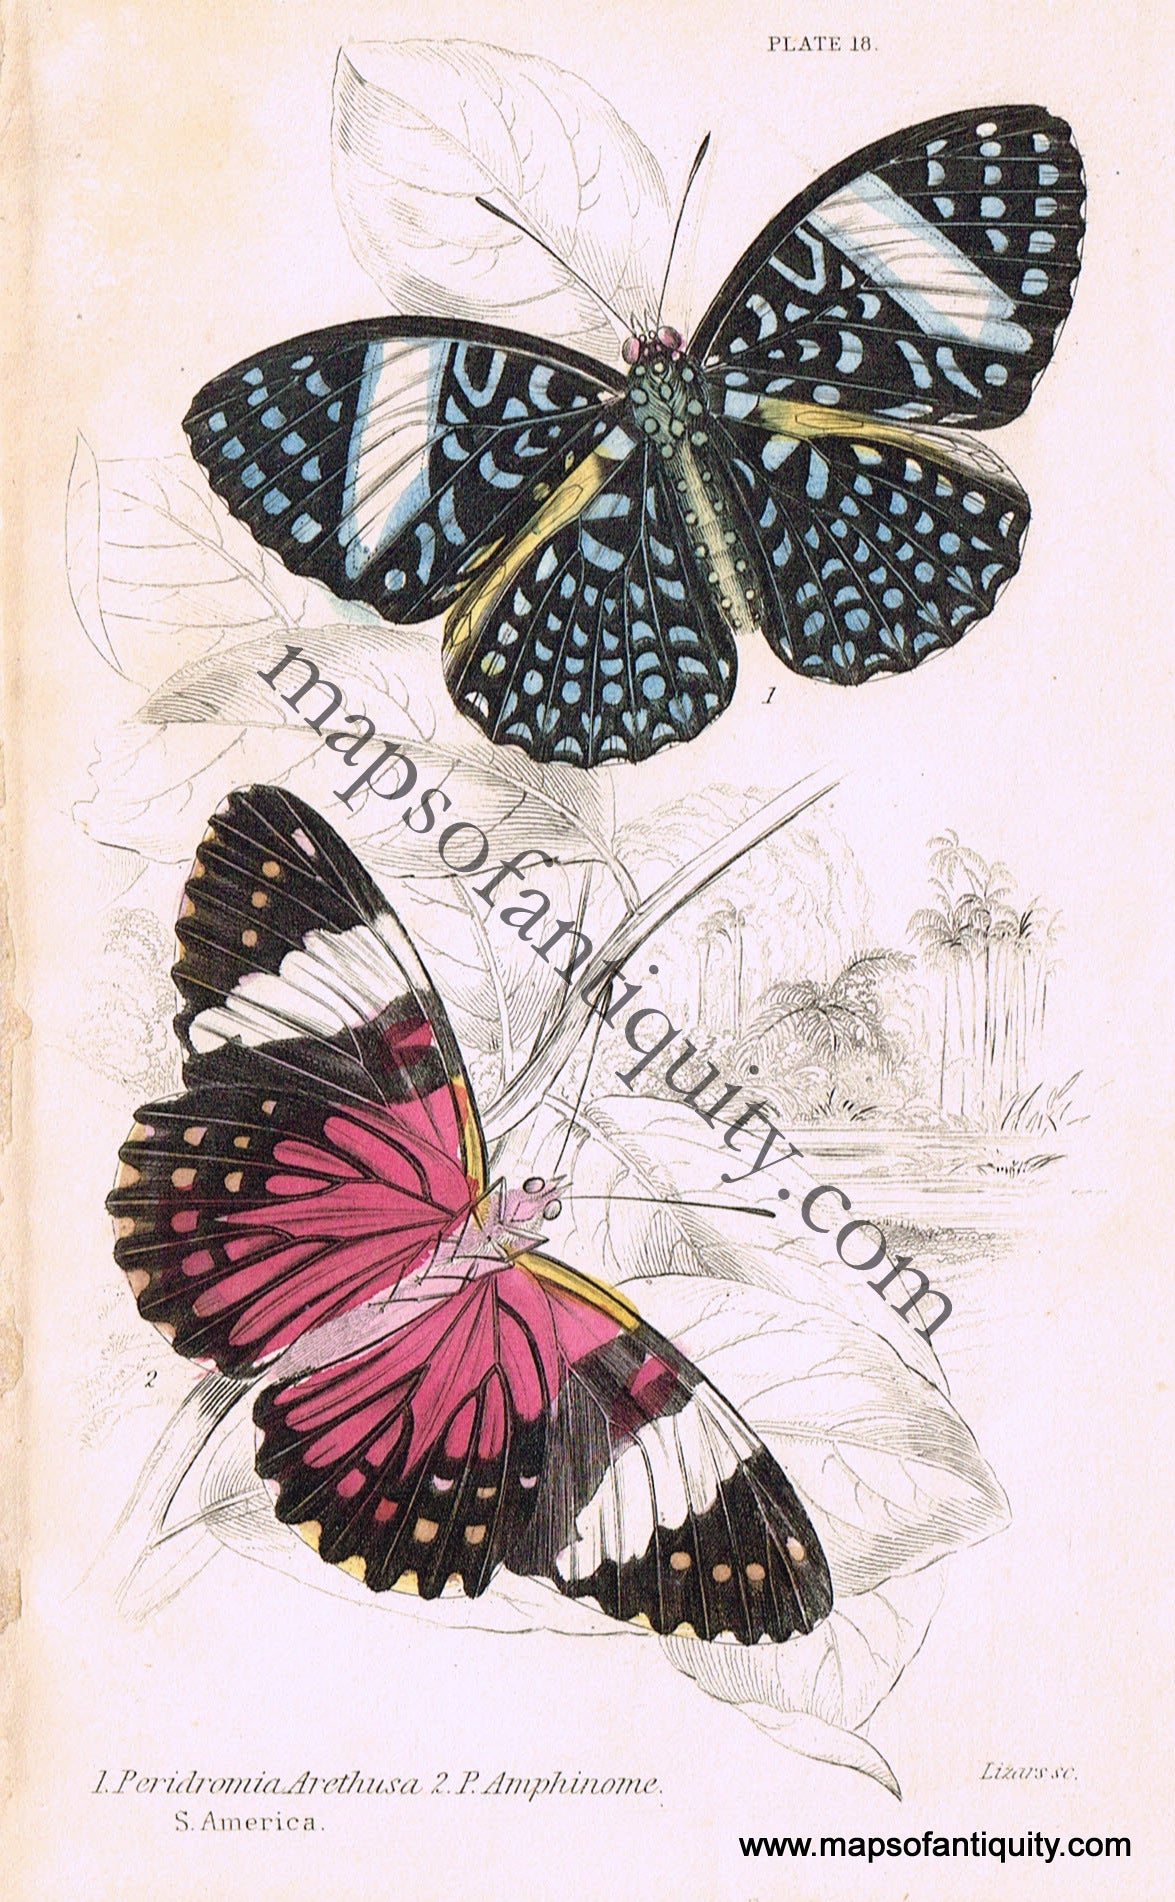 Antique-Hand-Colored-Print-Peridromia-arethusa-&-P.-amphinome-Antique-Prints-Natural-History-Insects-1840-Duncan-Maps-Of-Antiquity